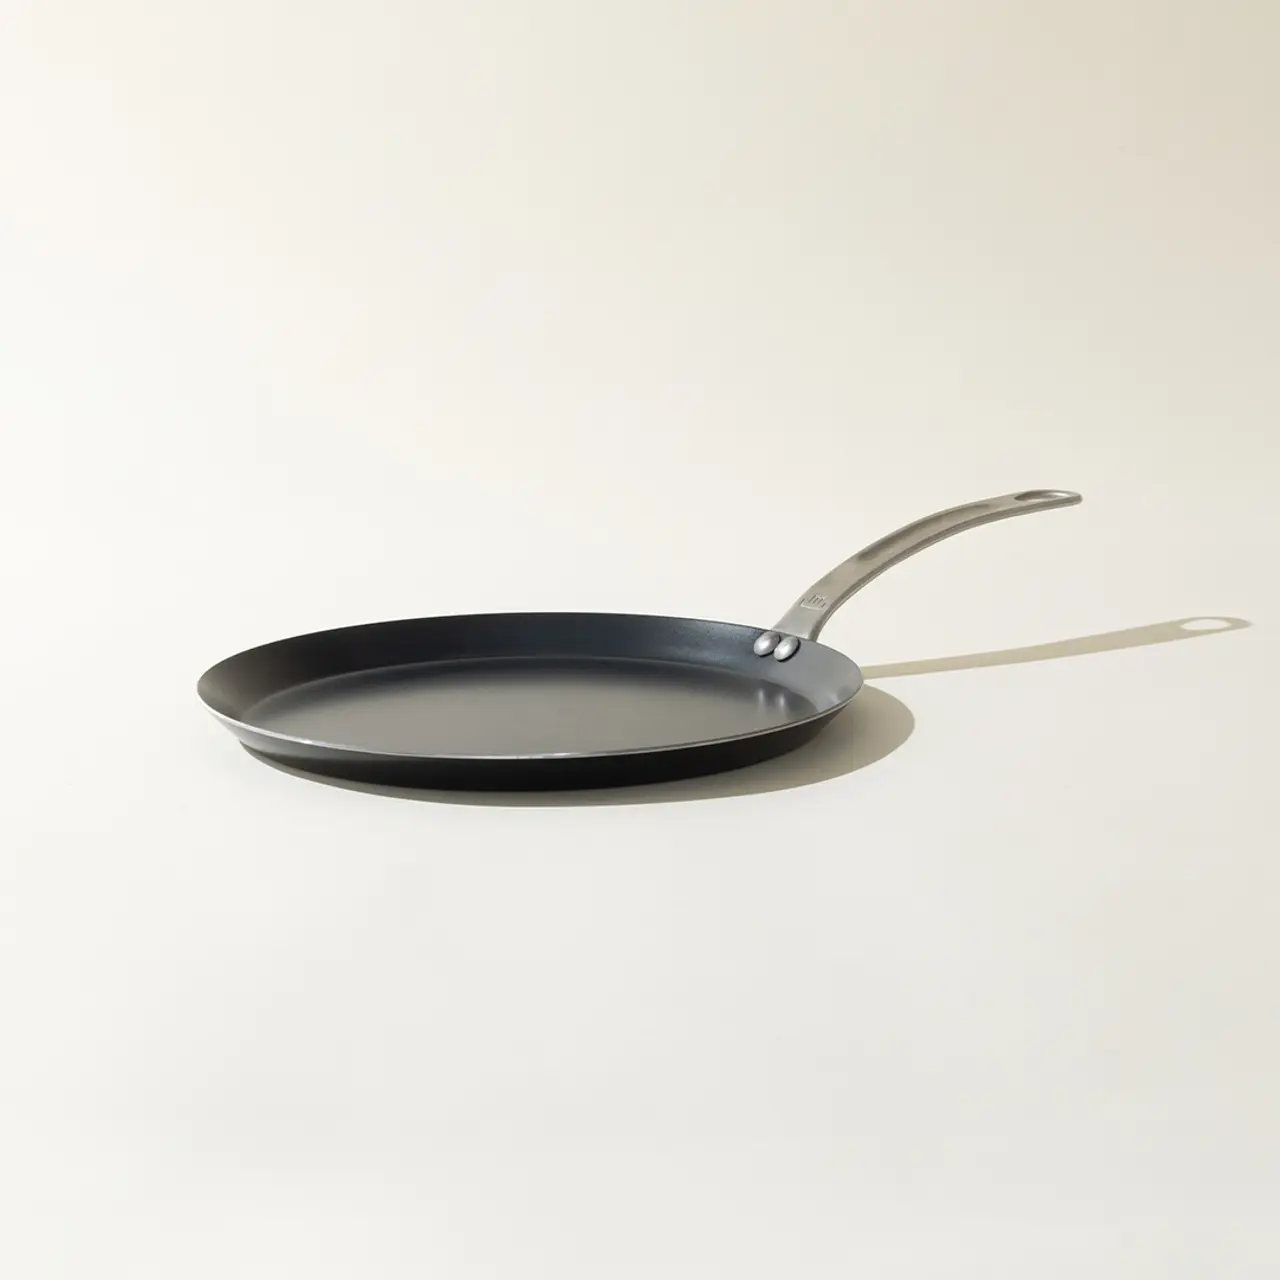 A black non-stick frying pan with a silver handle on a plain background.